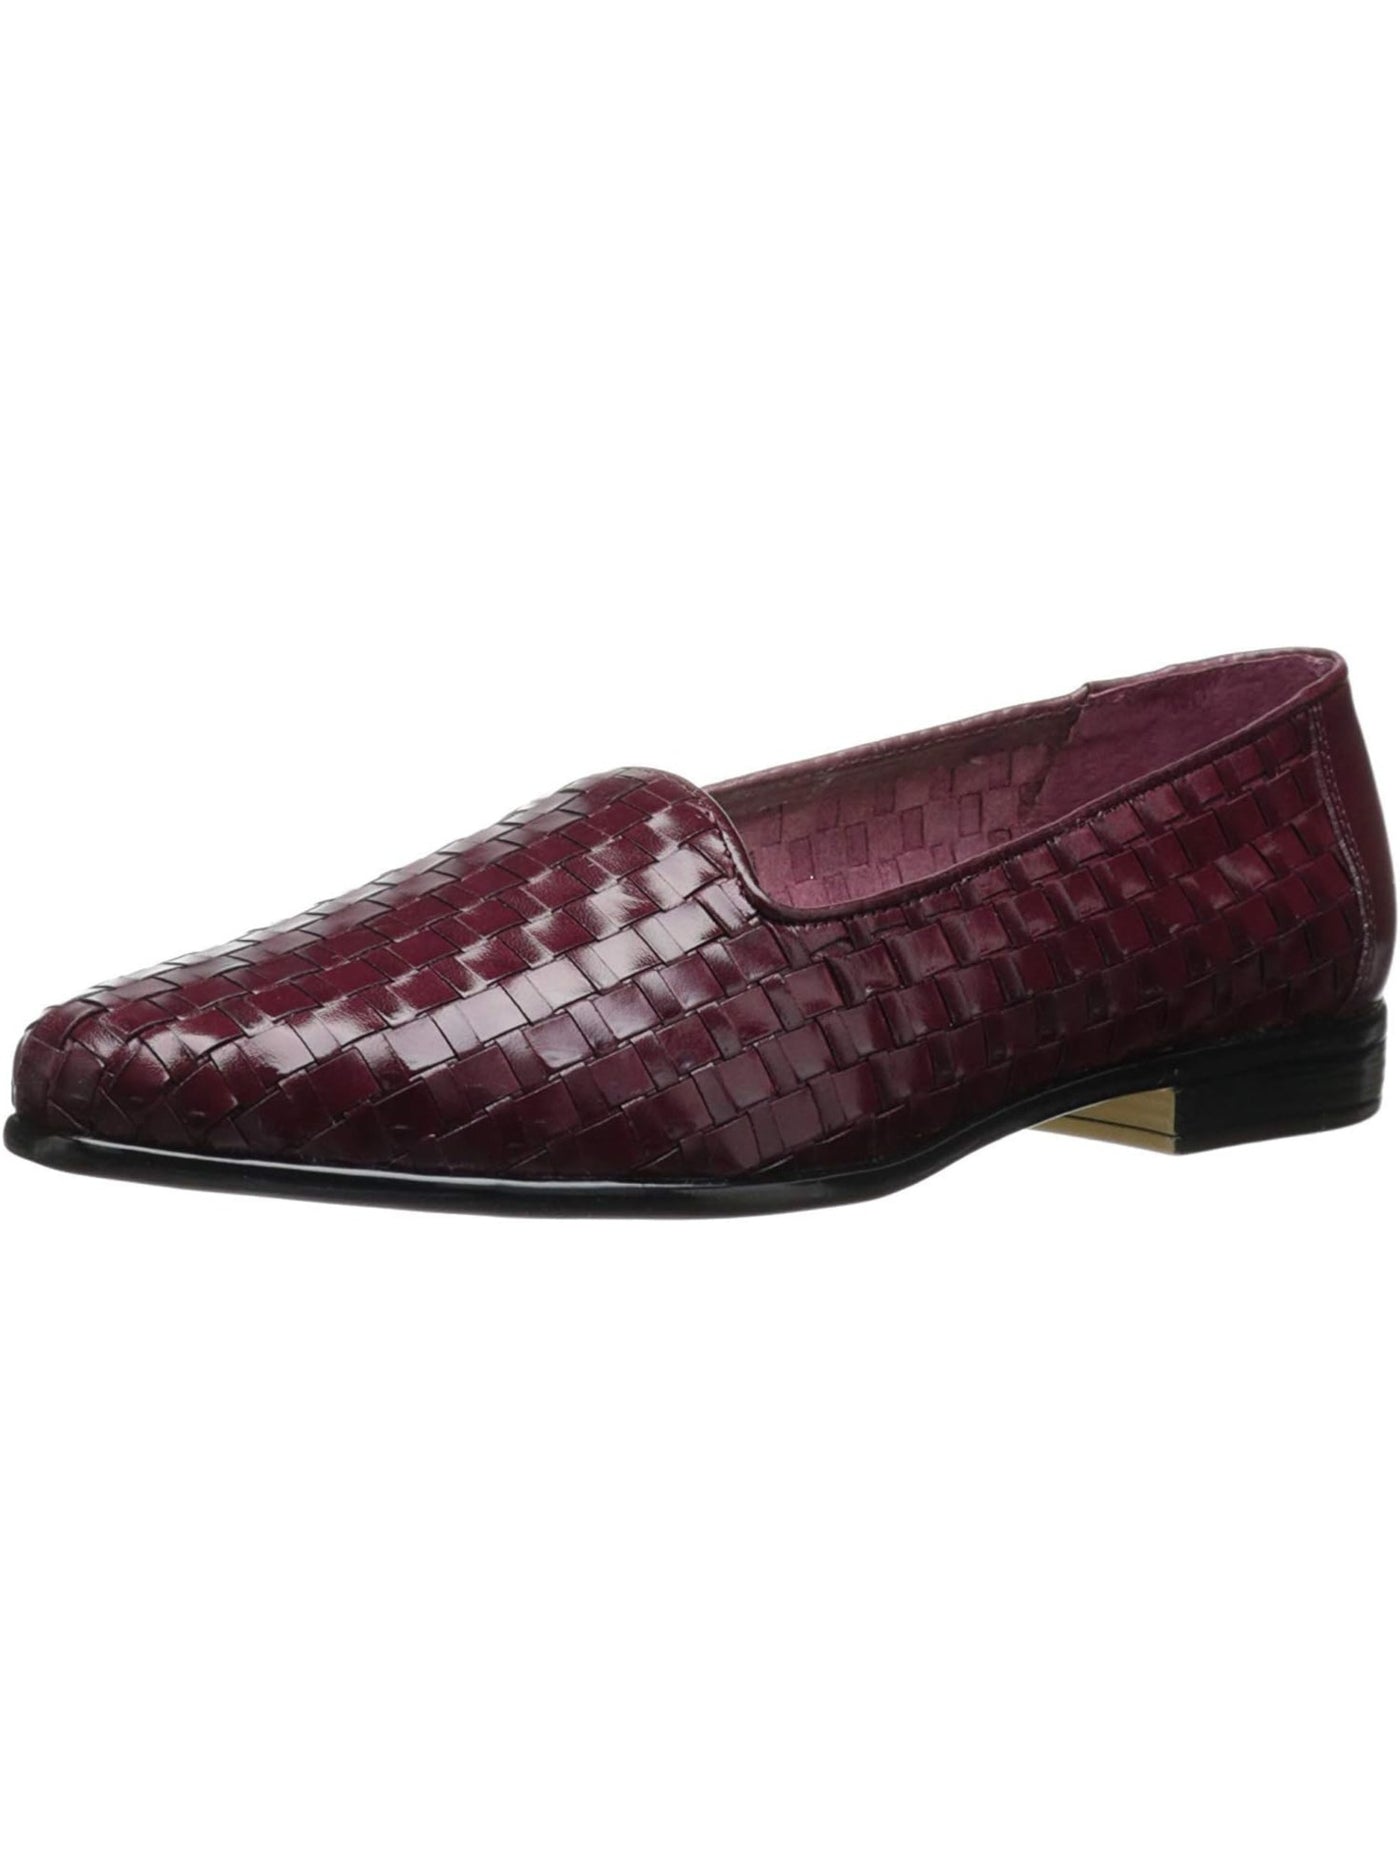 TROTTERS Womens Burgundy Woven Liz Almond Toe Slip On Leather Dress Loafers Shoes 7 N